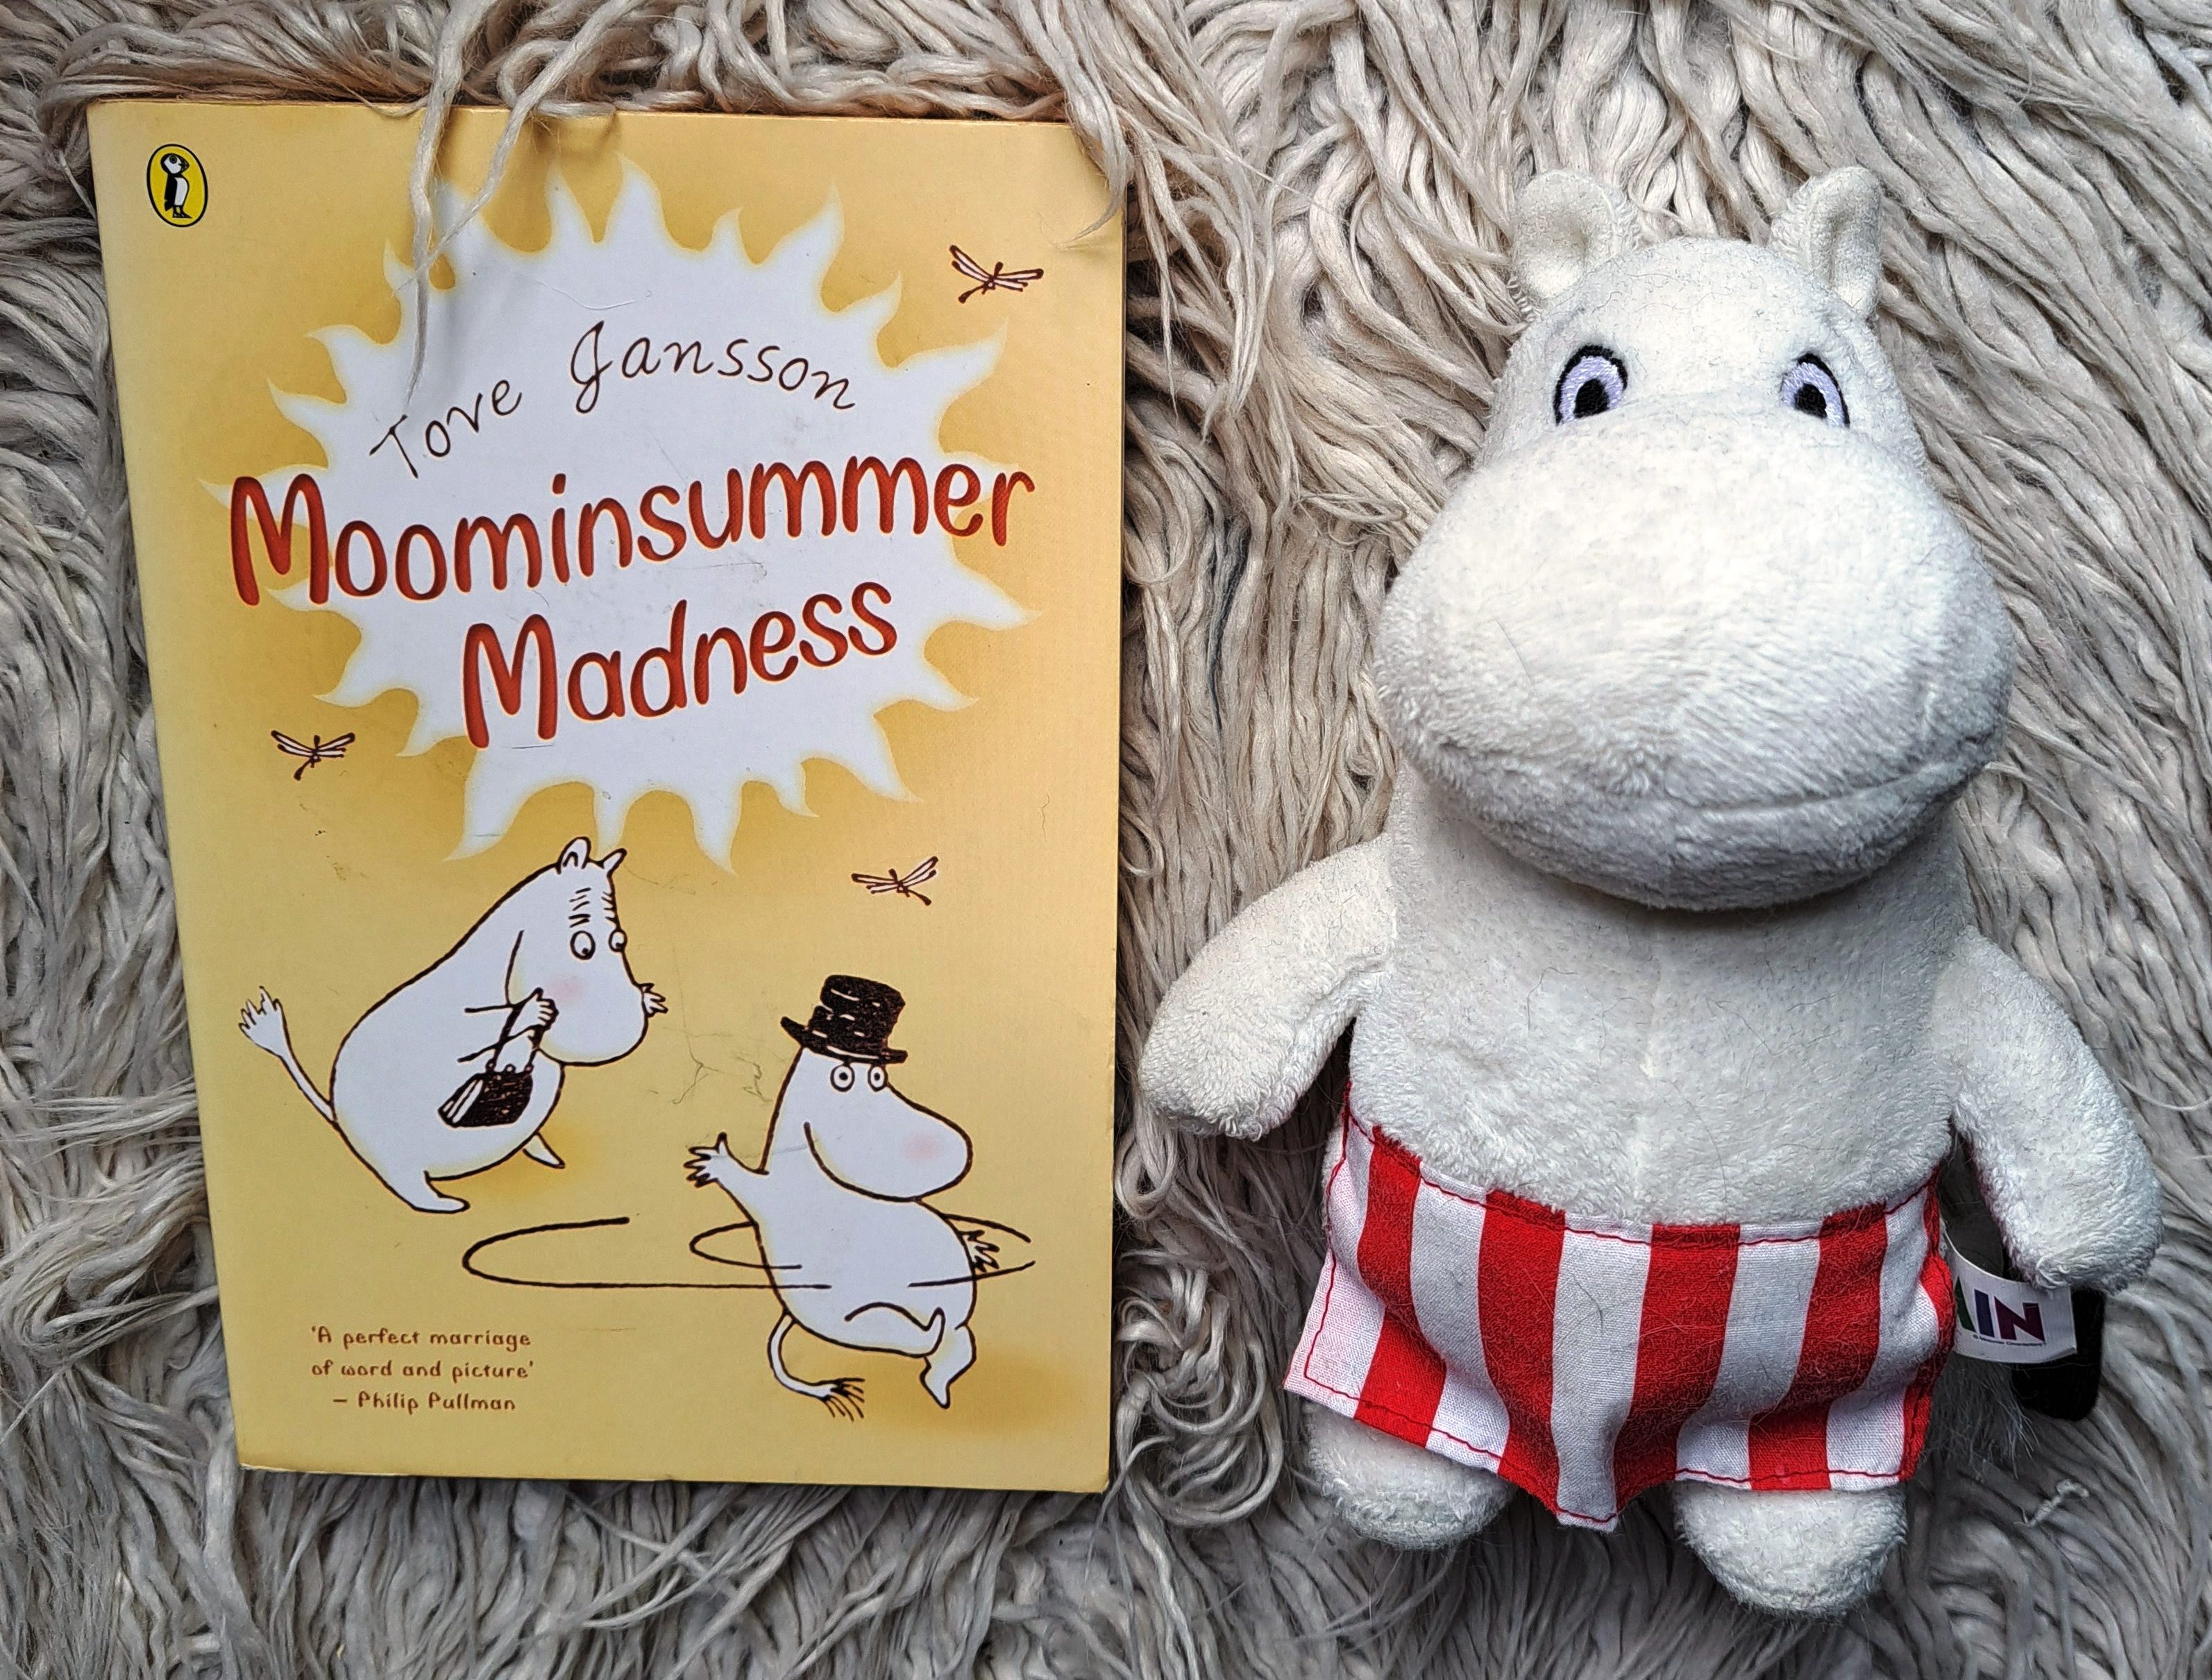 copy of Tove Jansson's Moominsummer Madness and a cuddly toy Moominmamma